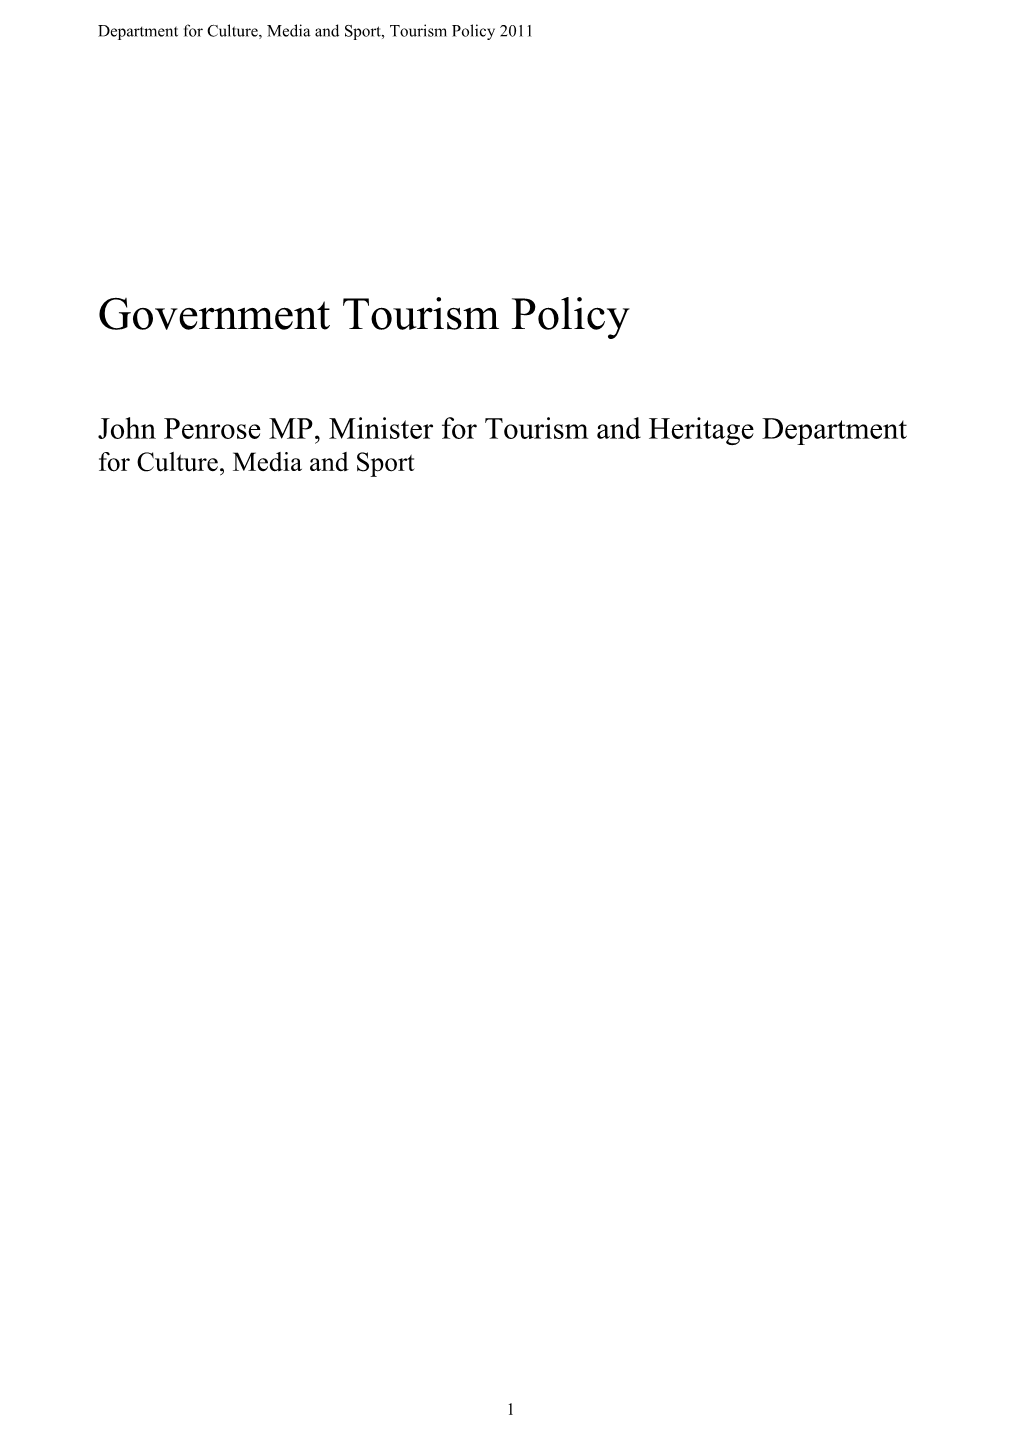 Department for Culture, Media and Sport, Tourism Policy 2011